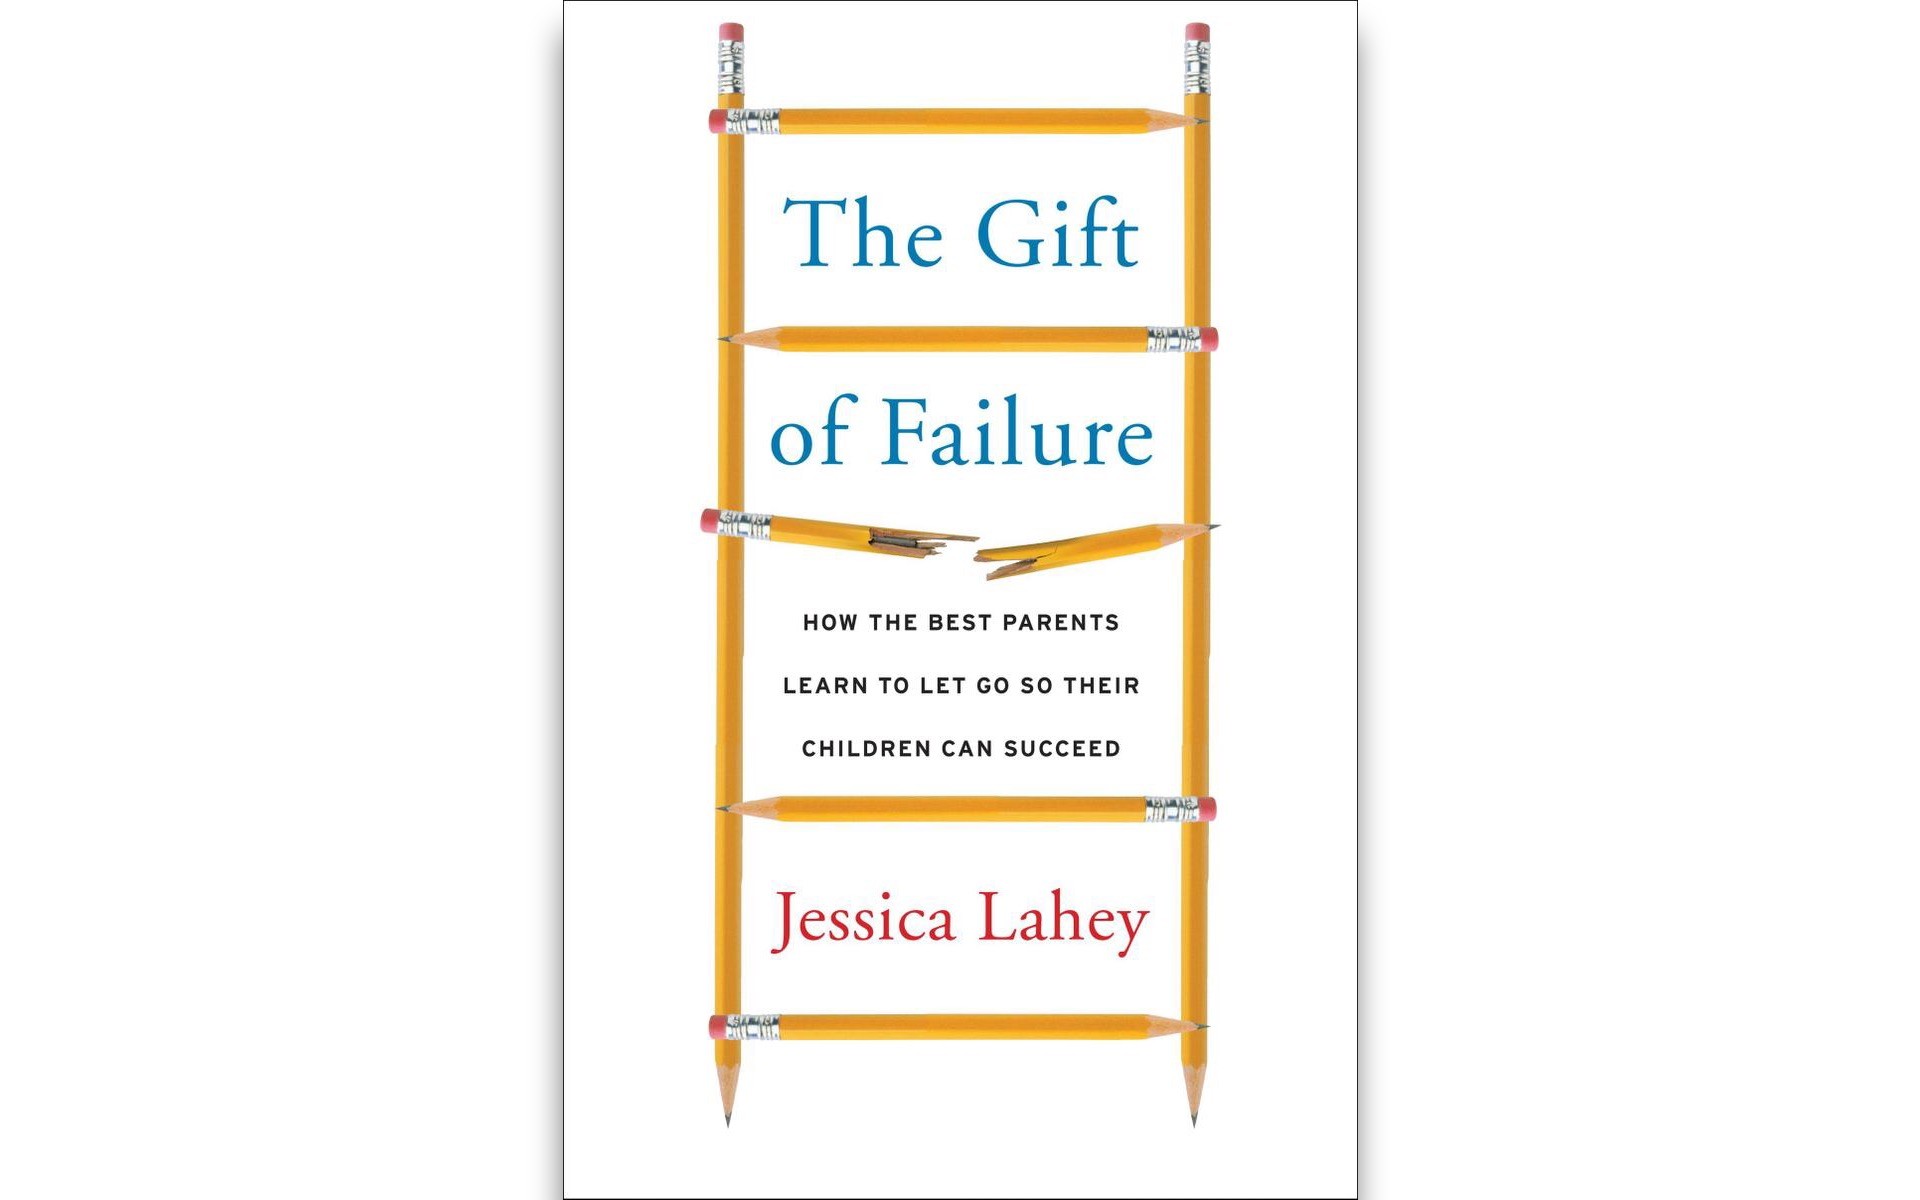 The Gift of Failure by Jessica Lahey.